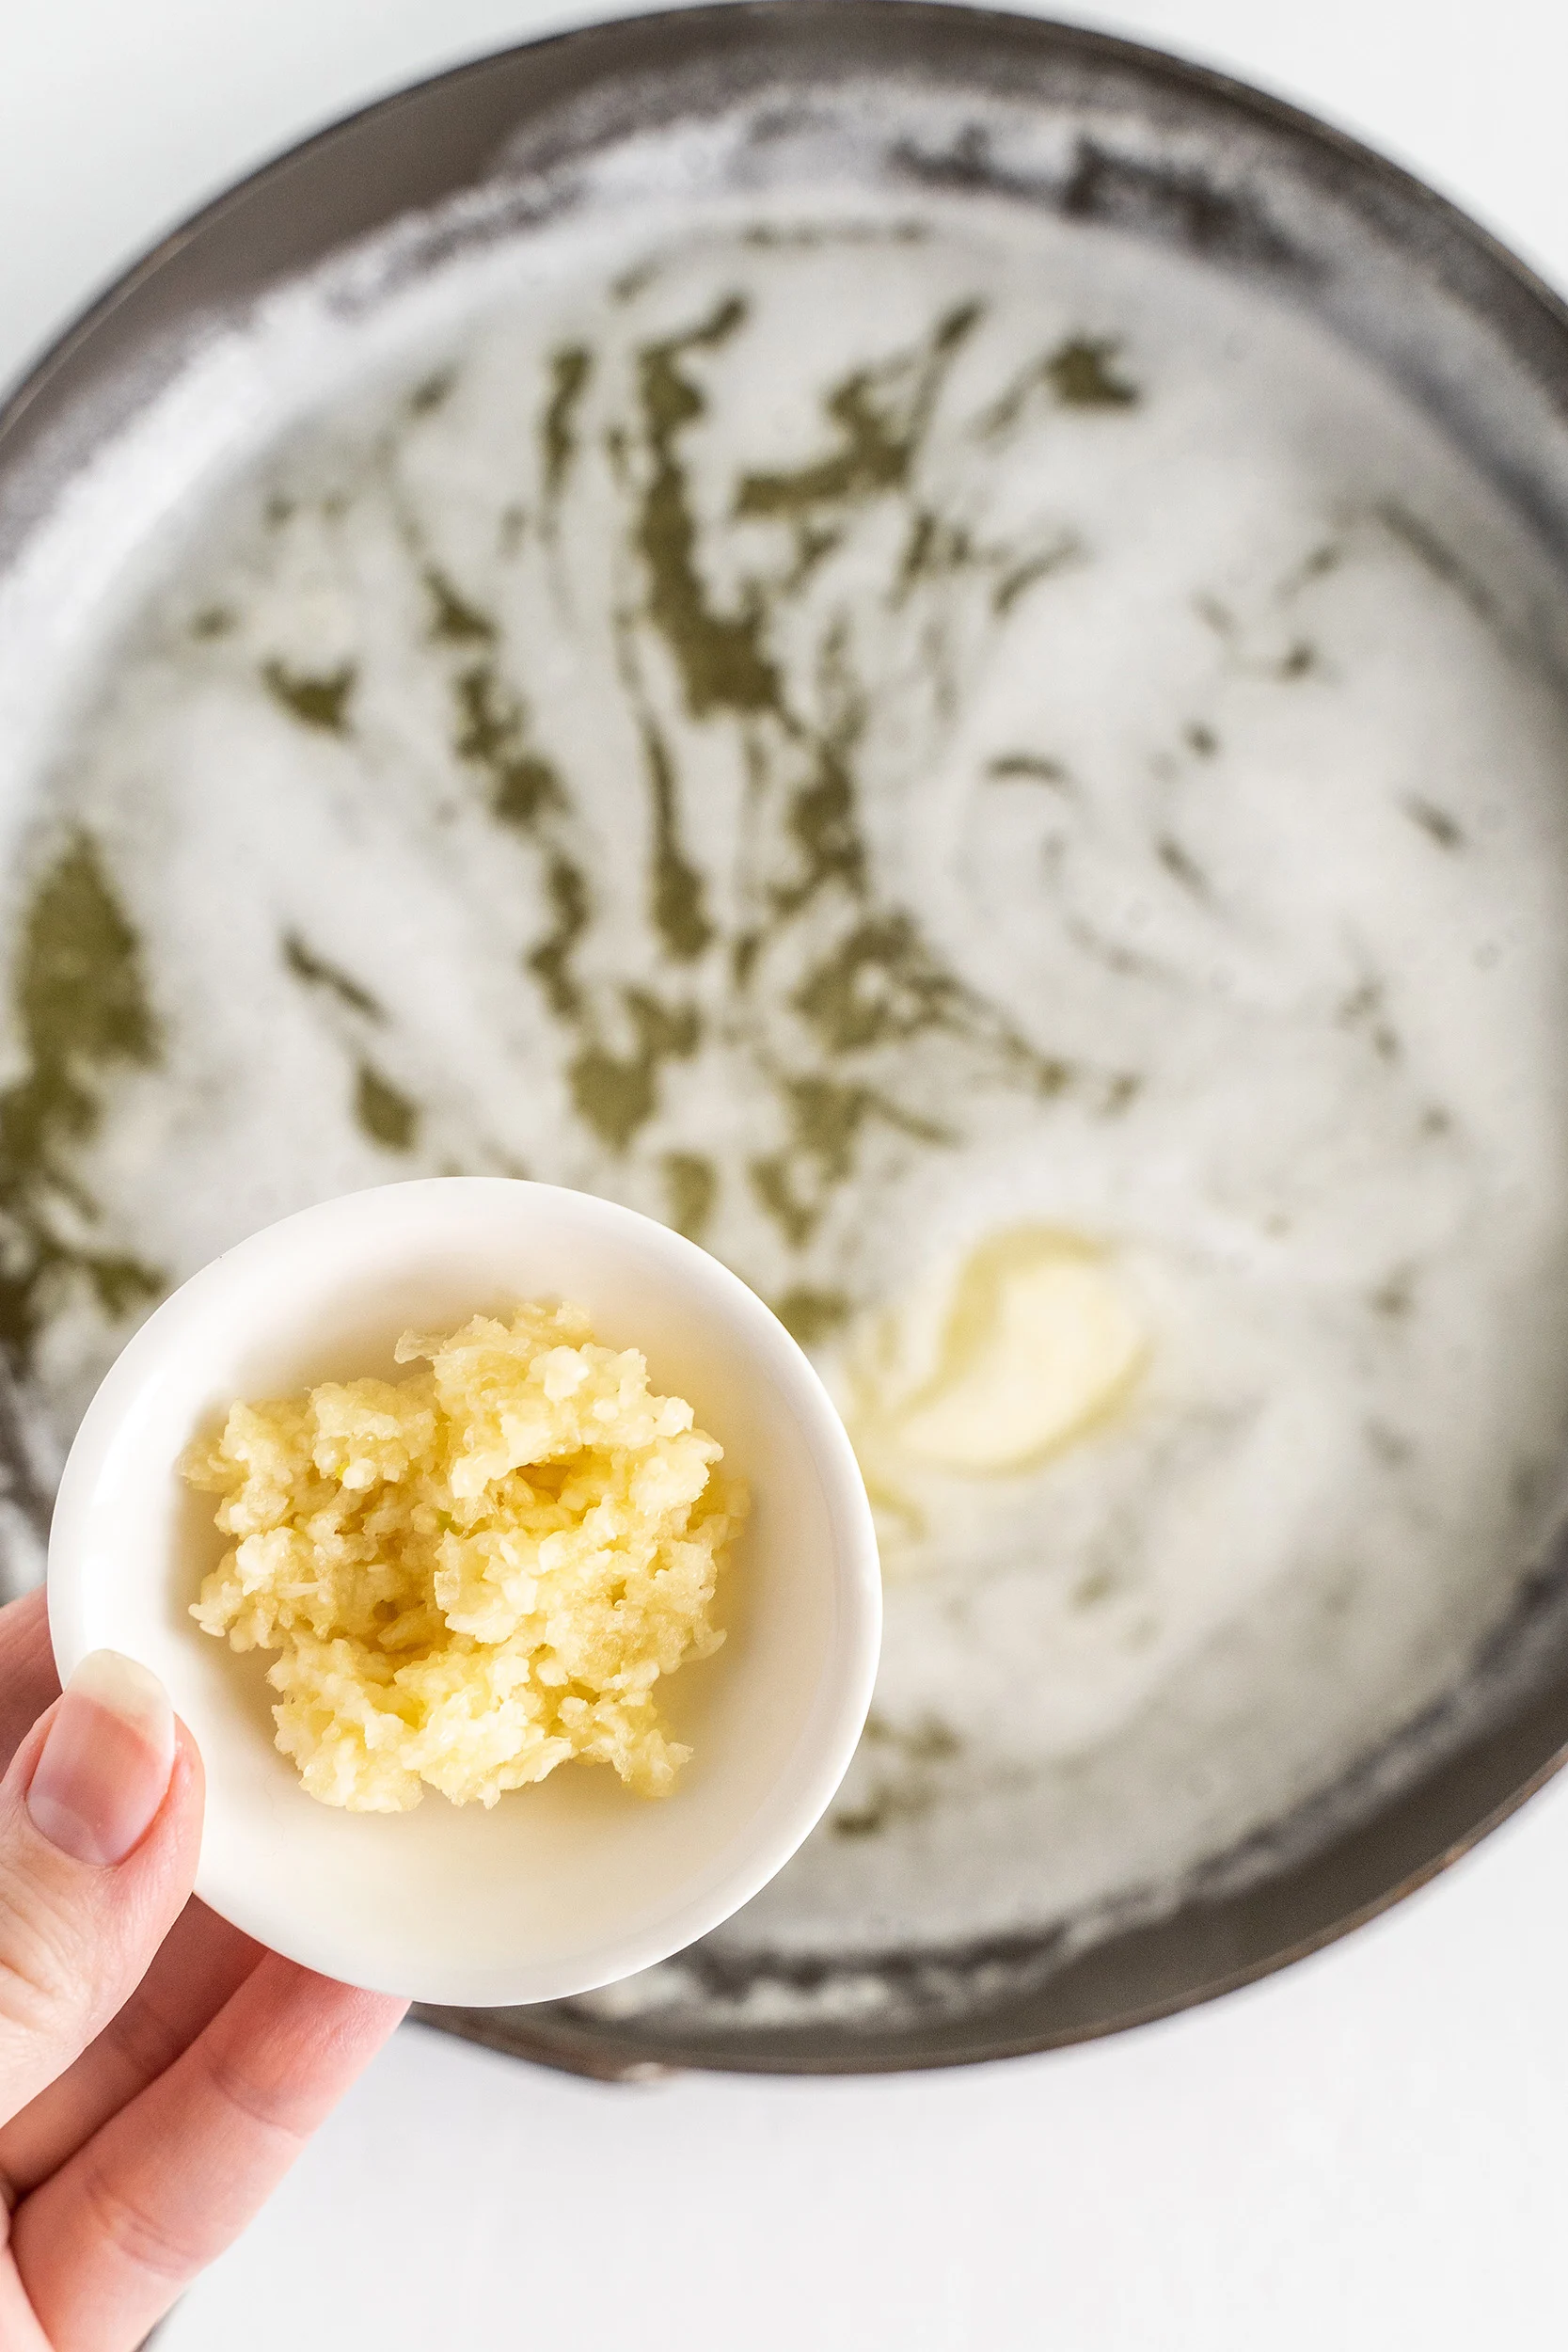 minced garlic in a small bowl being held over a pan of melted butter